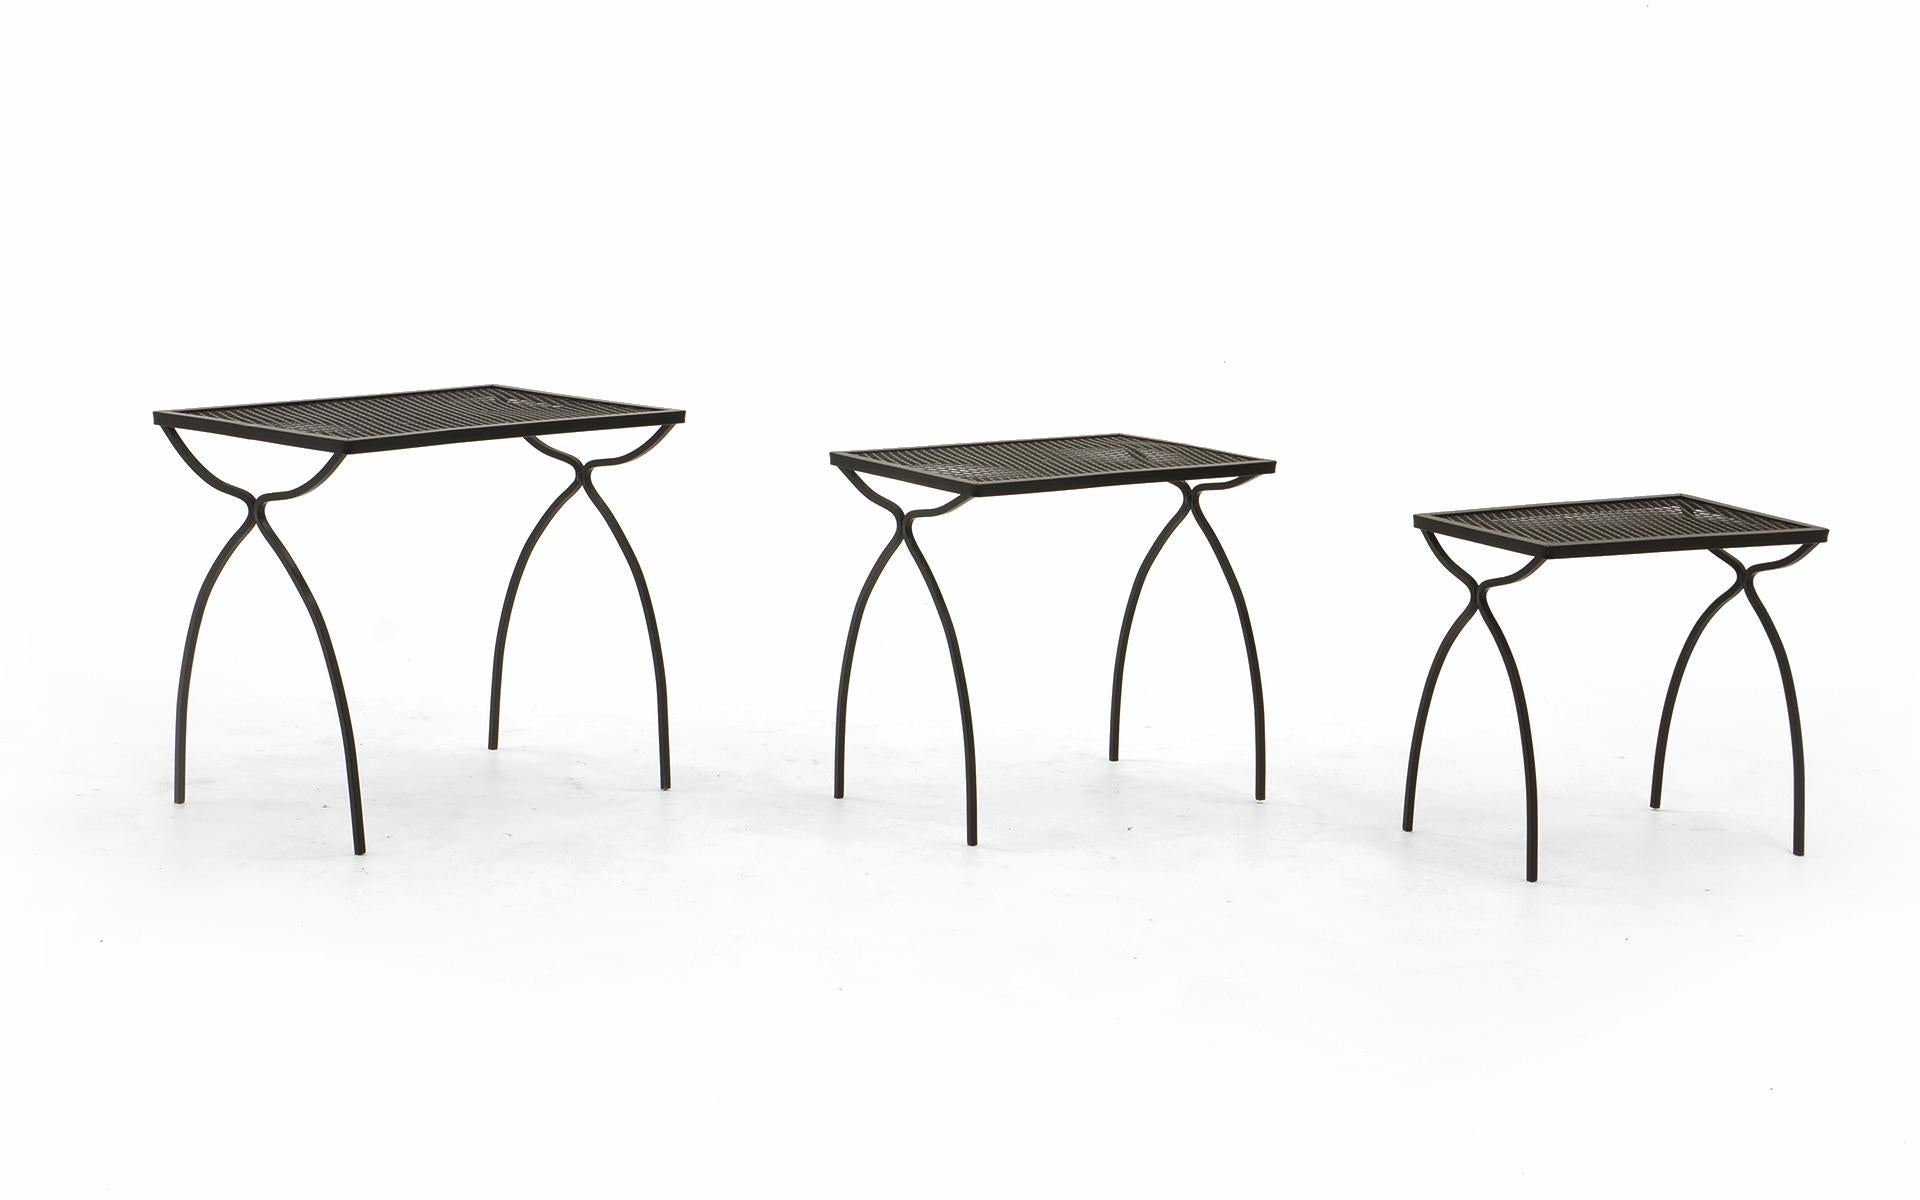 Set of three wrought iron and steel nesting tables by the John Salterini Company, 1960s. Professionally media blasted and powder coated in a satin black finish.
Measurements
Small: 15.5 in. H x 16.5 in. W x 10.5 in. D
Medium: 17 in. H x 18.25 in. W